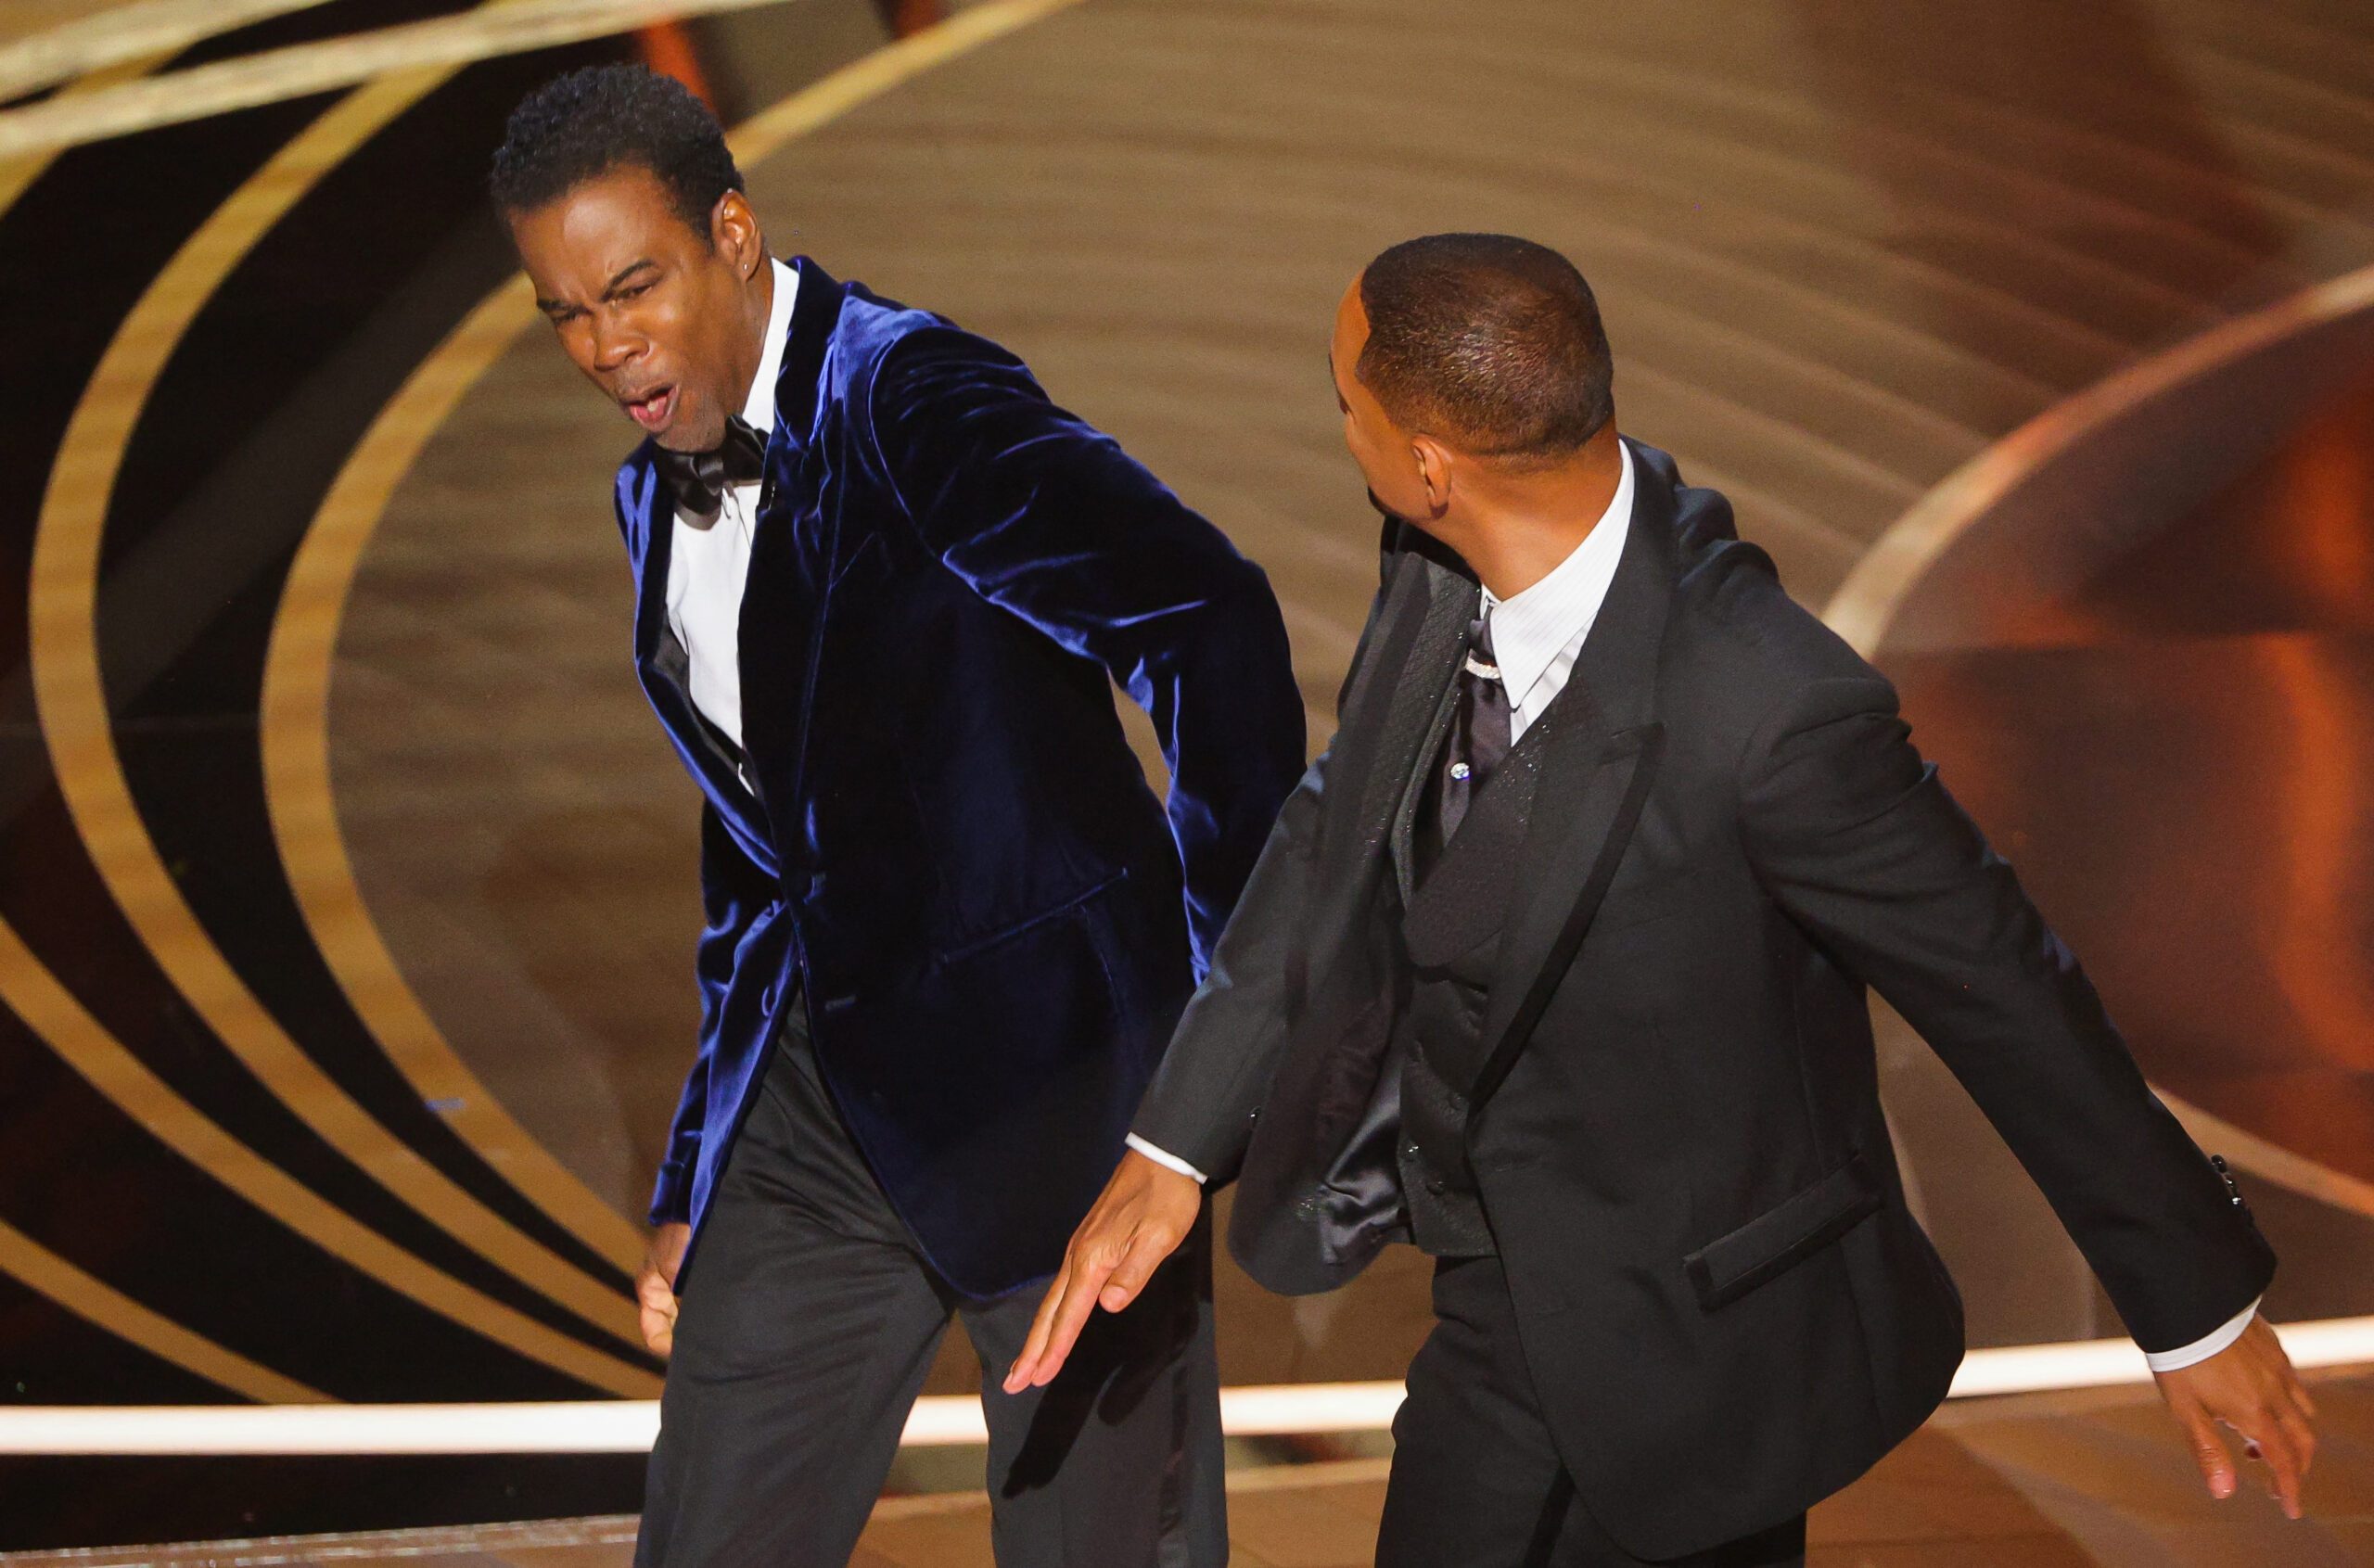 Will Smith smacks Chris Rock on stage at Oscars 2022, then apologizes upon winning Oscar